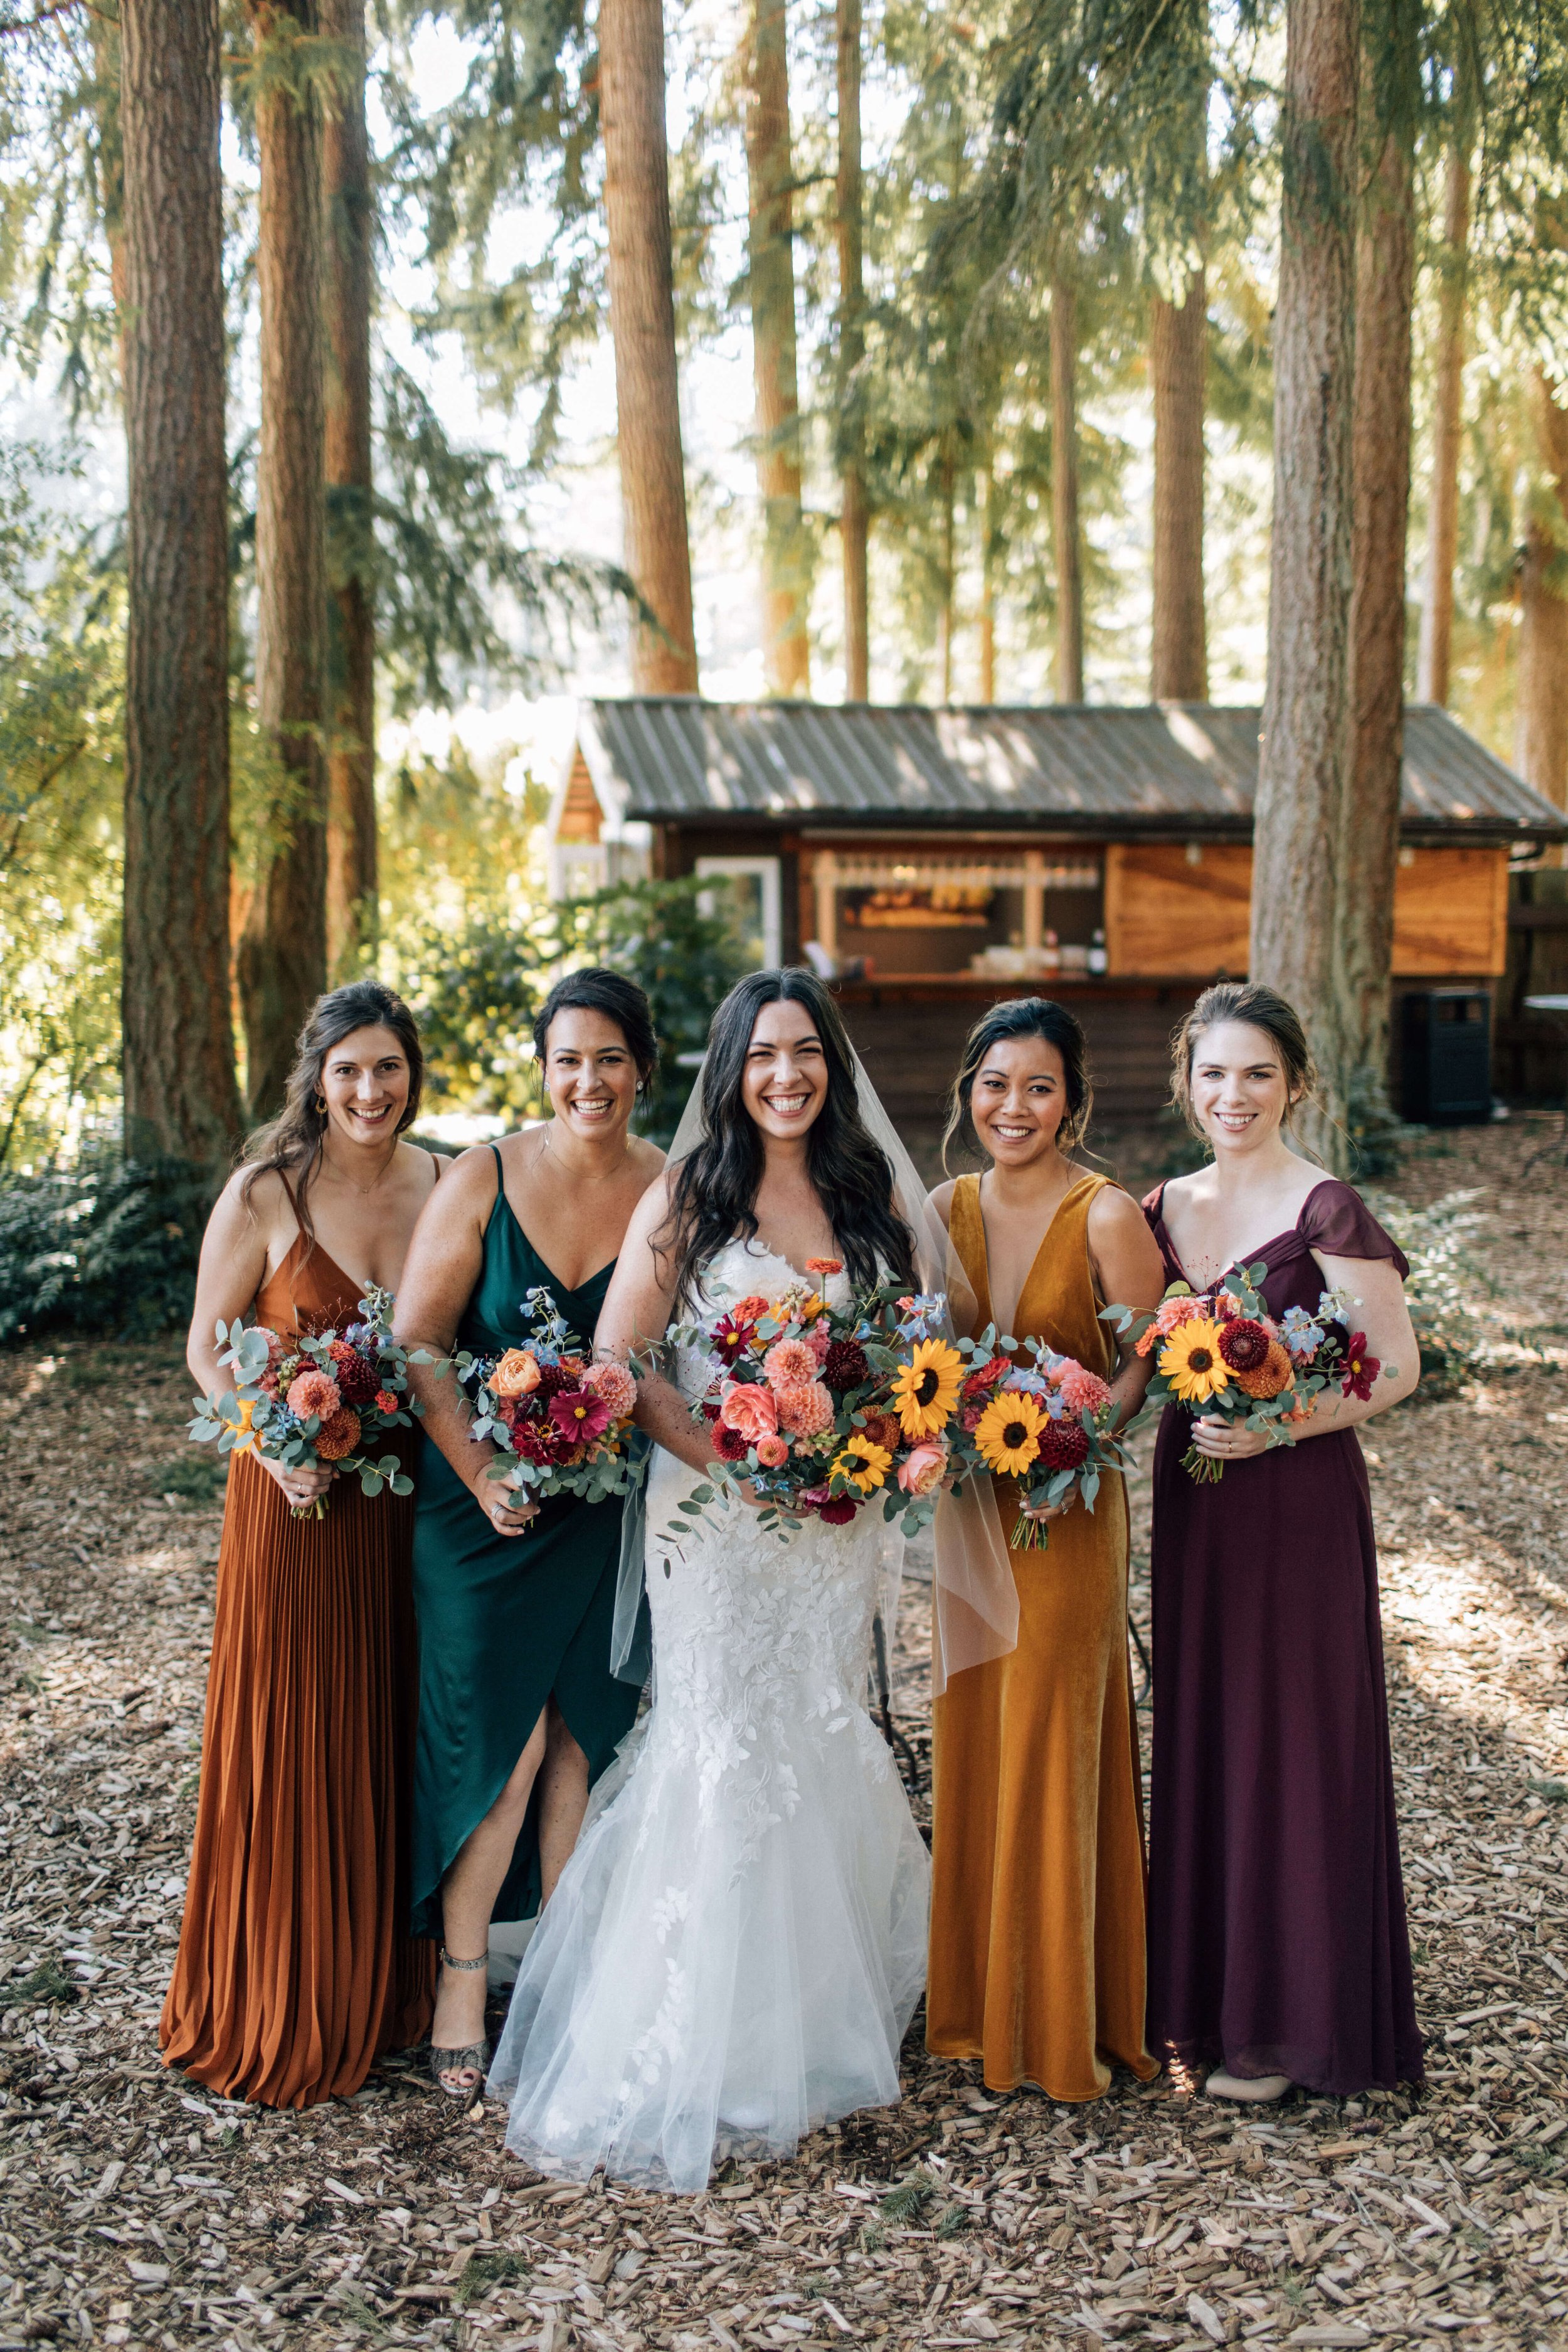 Colorful, Romantic, Whimsical Bridal & Bridesmaids bouquet in the Pacific Northwest